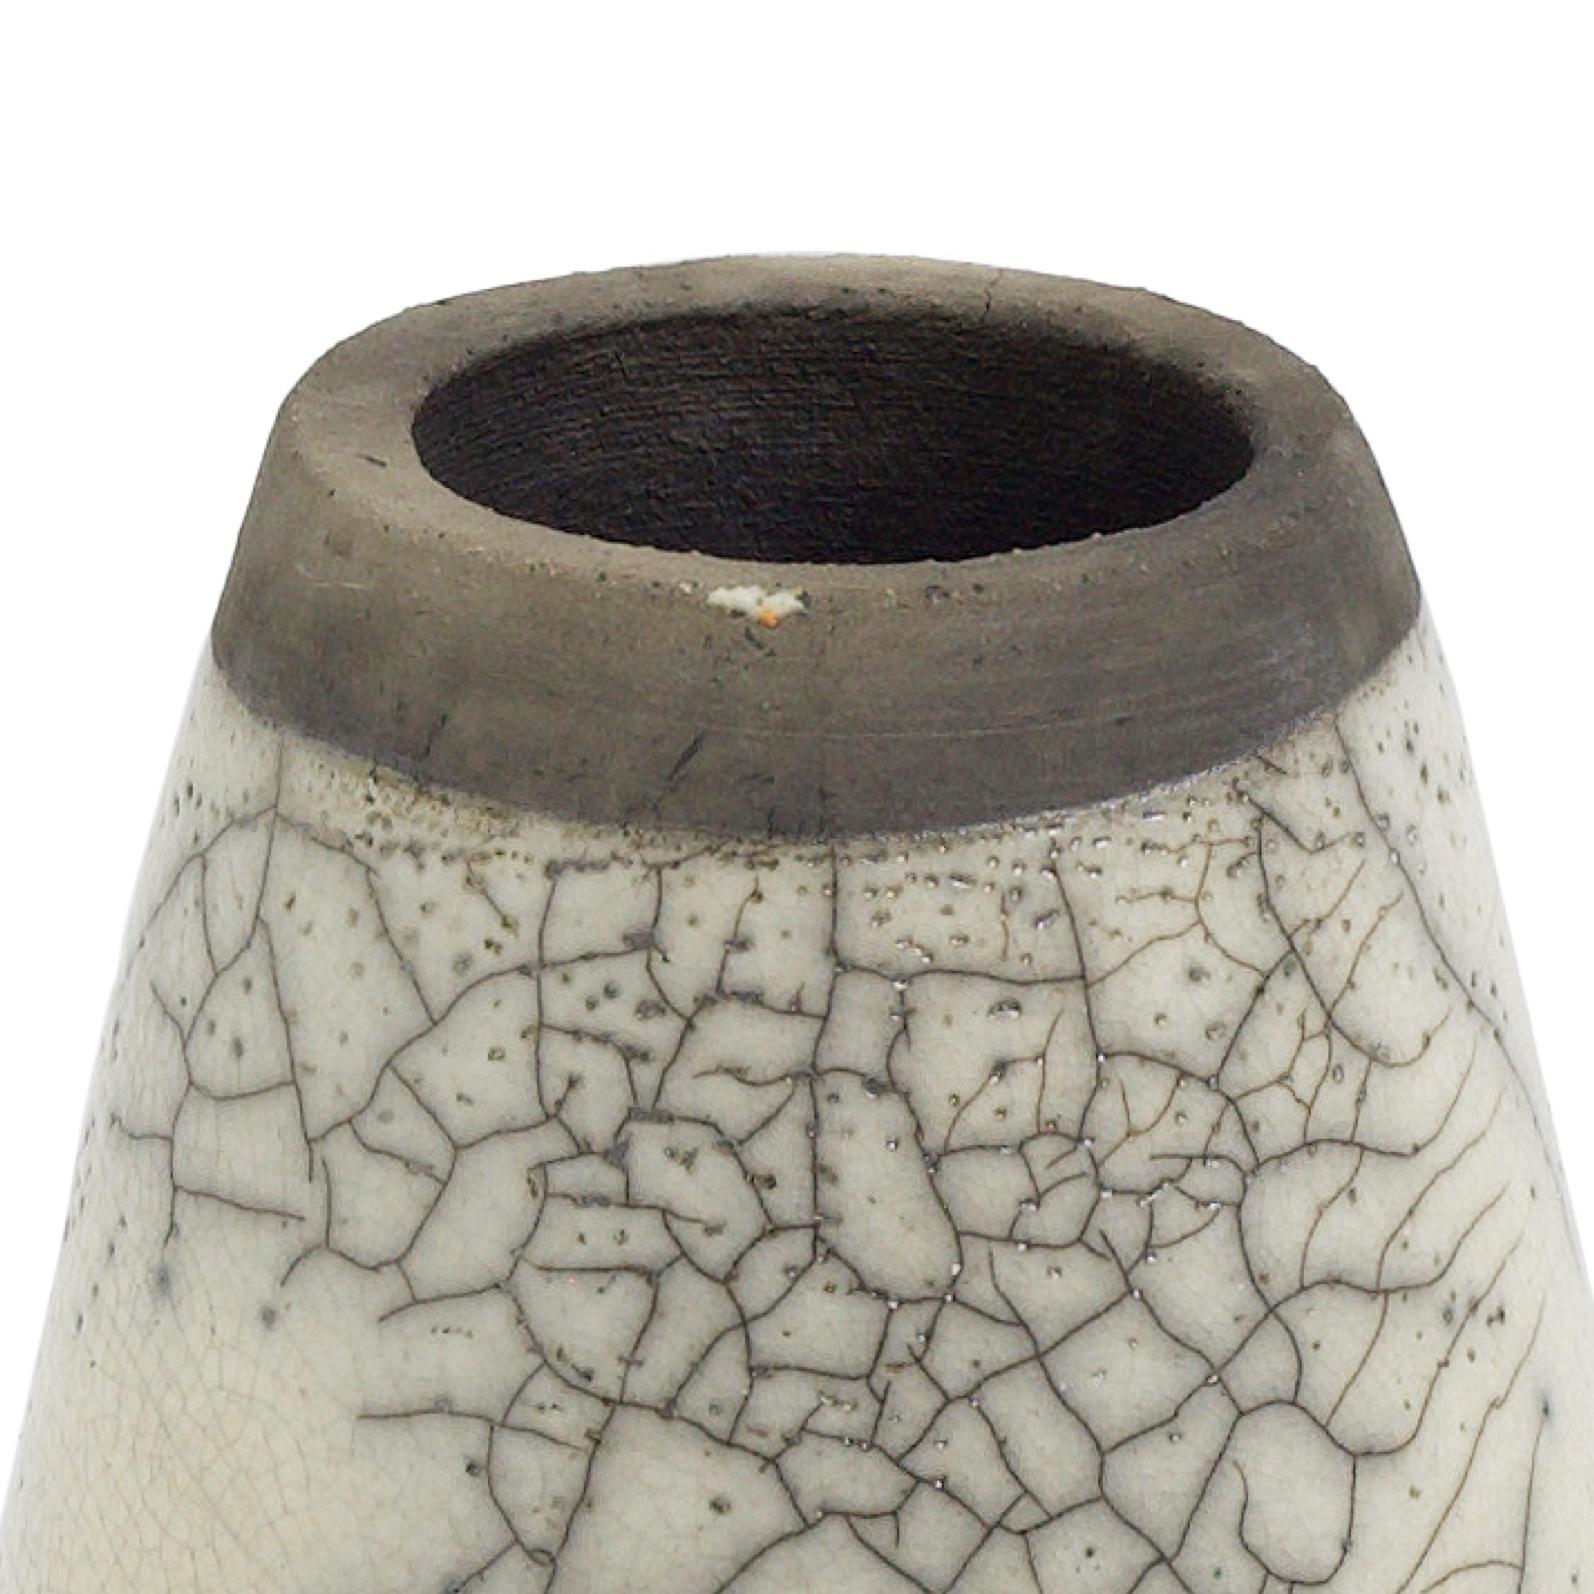 Middle East Modern LAAB Kazan Vase Raku Ceramic Green White Black Metal In New Condition For Sale In monza, Monza and Brianza